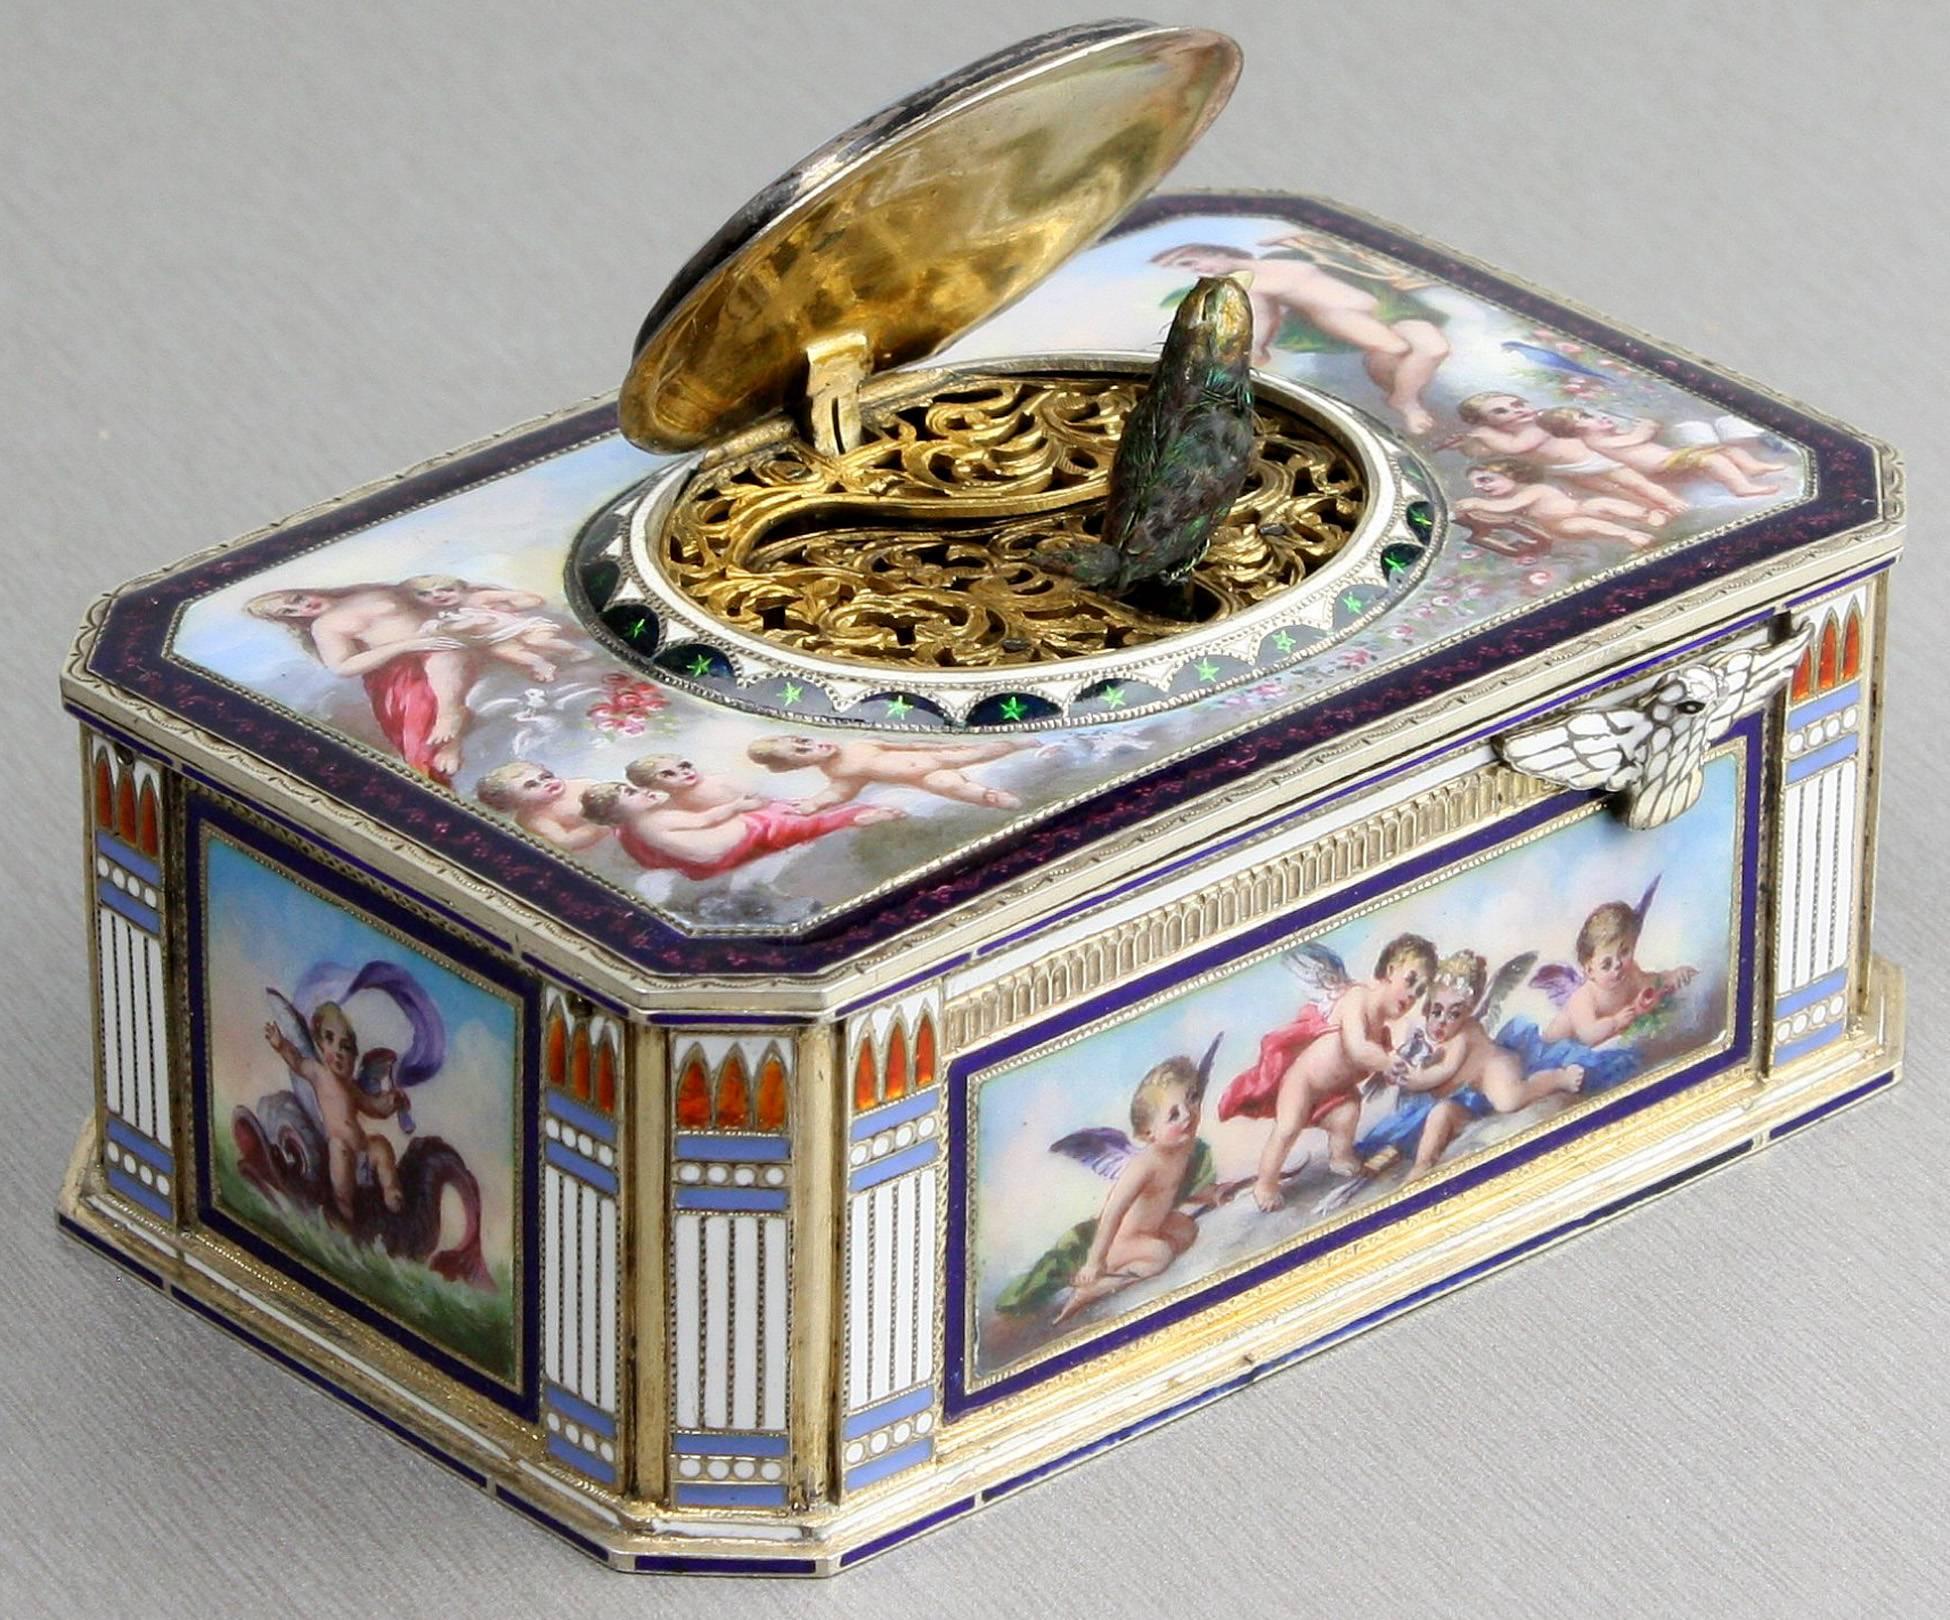 A magnificent early vintage silver and full pictorial enamel singing bird box by Karl Griesbaum,
 
German,

circa 1920.
 
A deluxe variant of the No. 7 model.

A video of this fantastic singing bird box in action is available, please contact